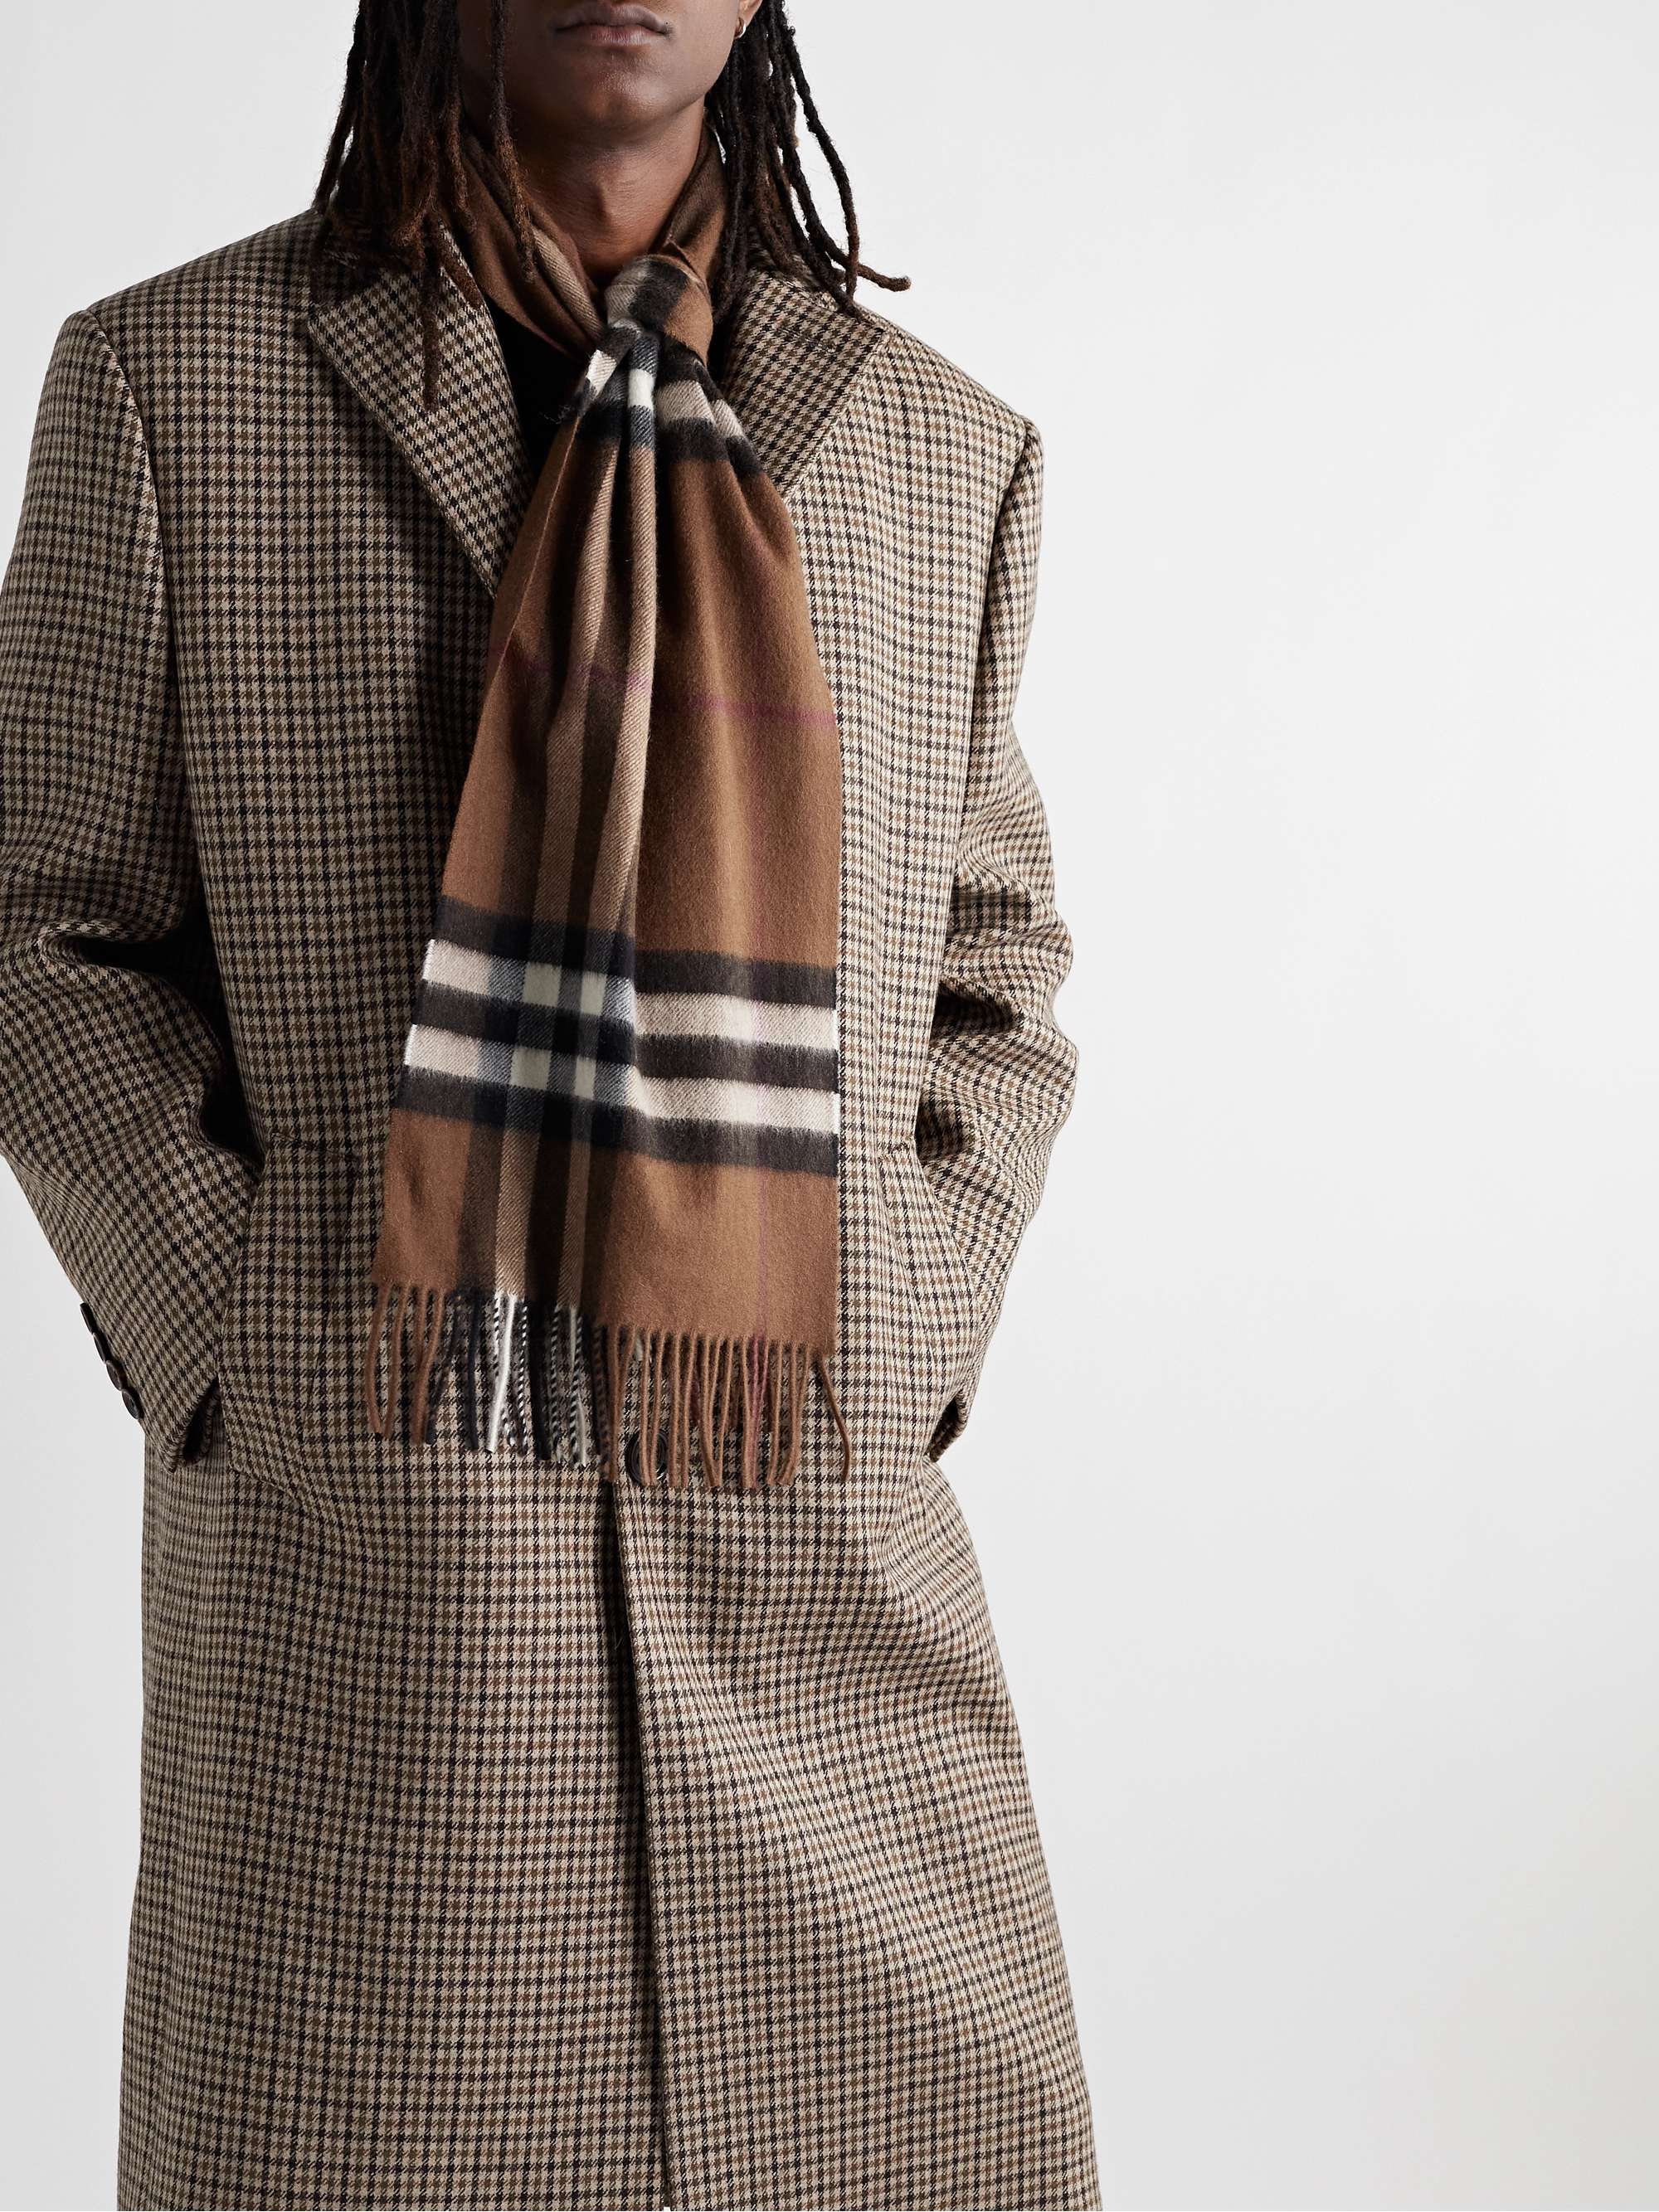 BURBERRY Fringed Checked Cashmere Scarf